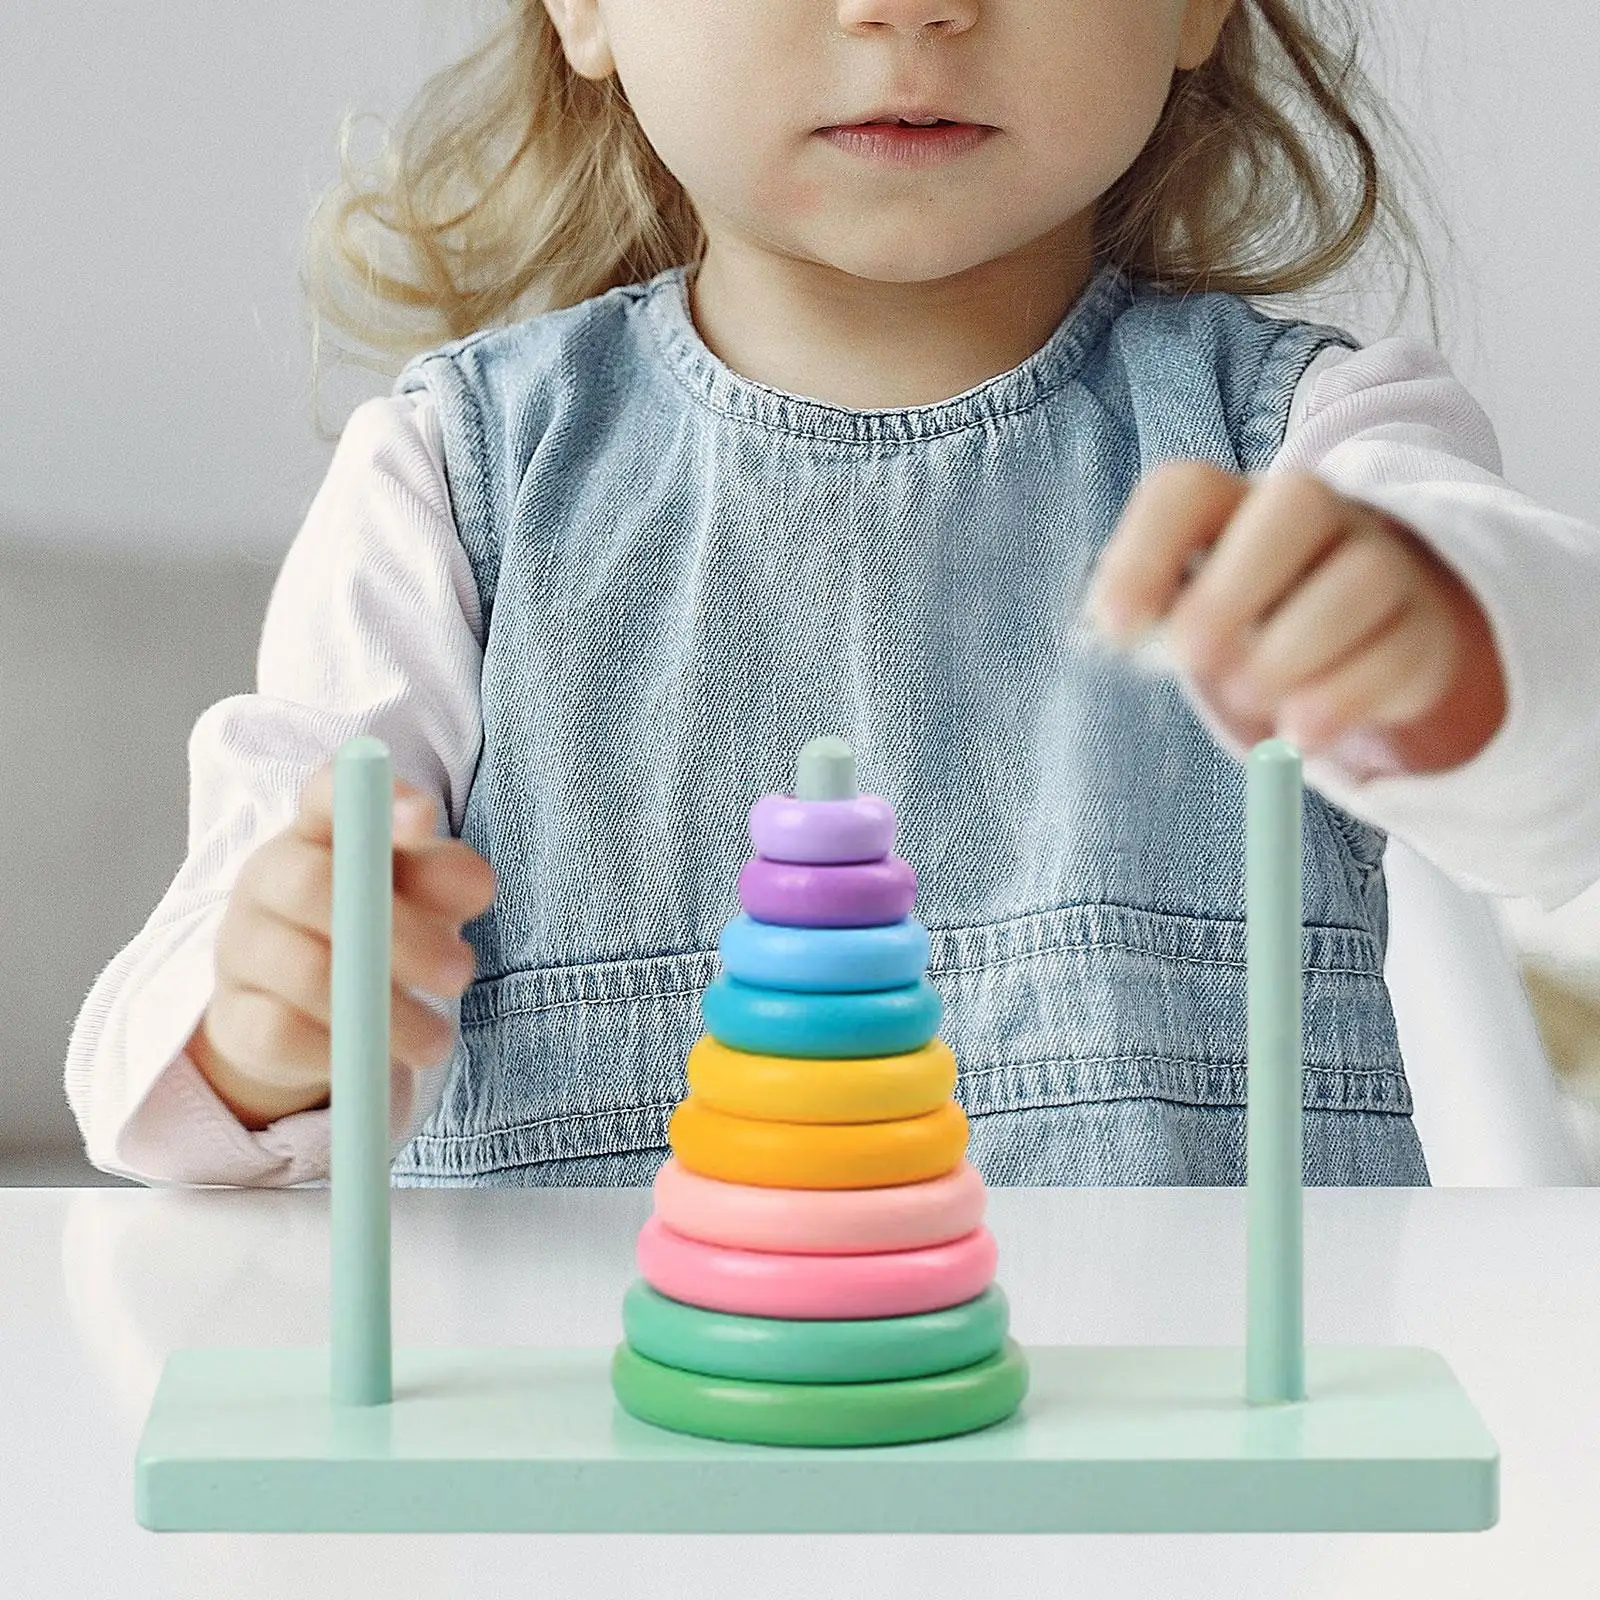 Wooden Stacking Rings Toy Intellectual Toy Sensory Toy Montessori Toy for Infant Ages 6+ Months Boy Girls Kids Birthday Gift